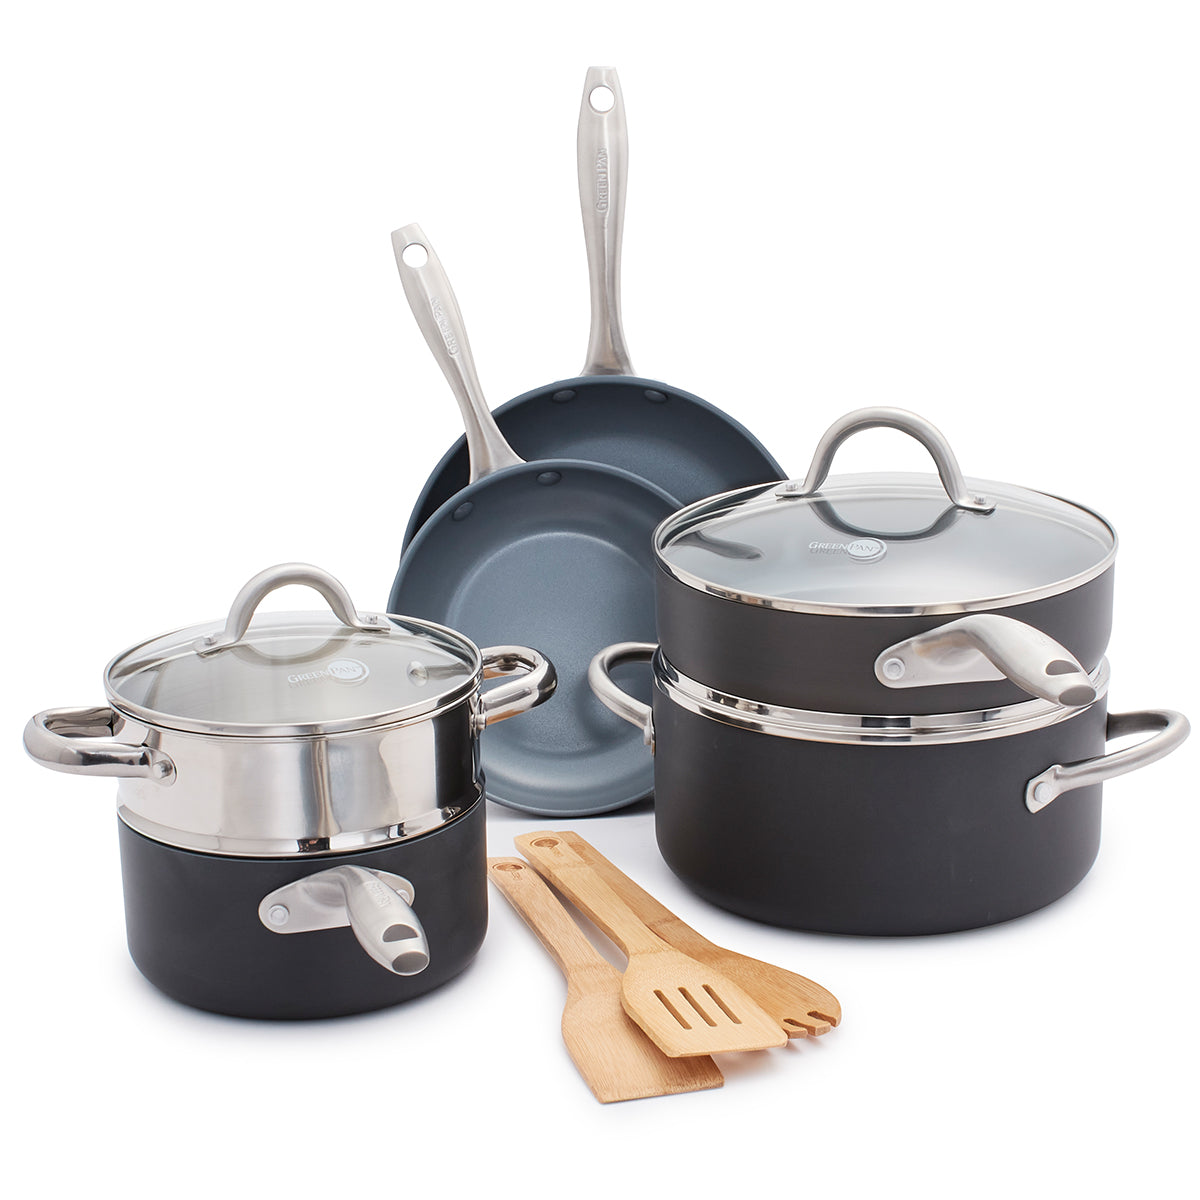 MICHELANGELO Pots and Pans Set 15 Piece with with Non- toxic Stone-Derived  Interior, Nonstick Kitchen Cookware Set with Utensils